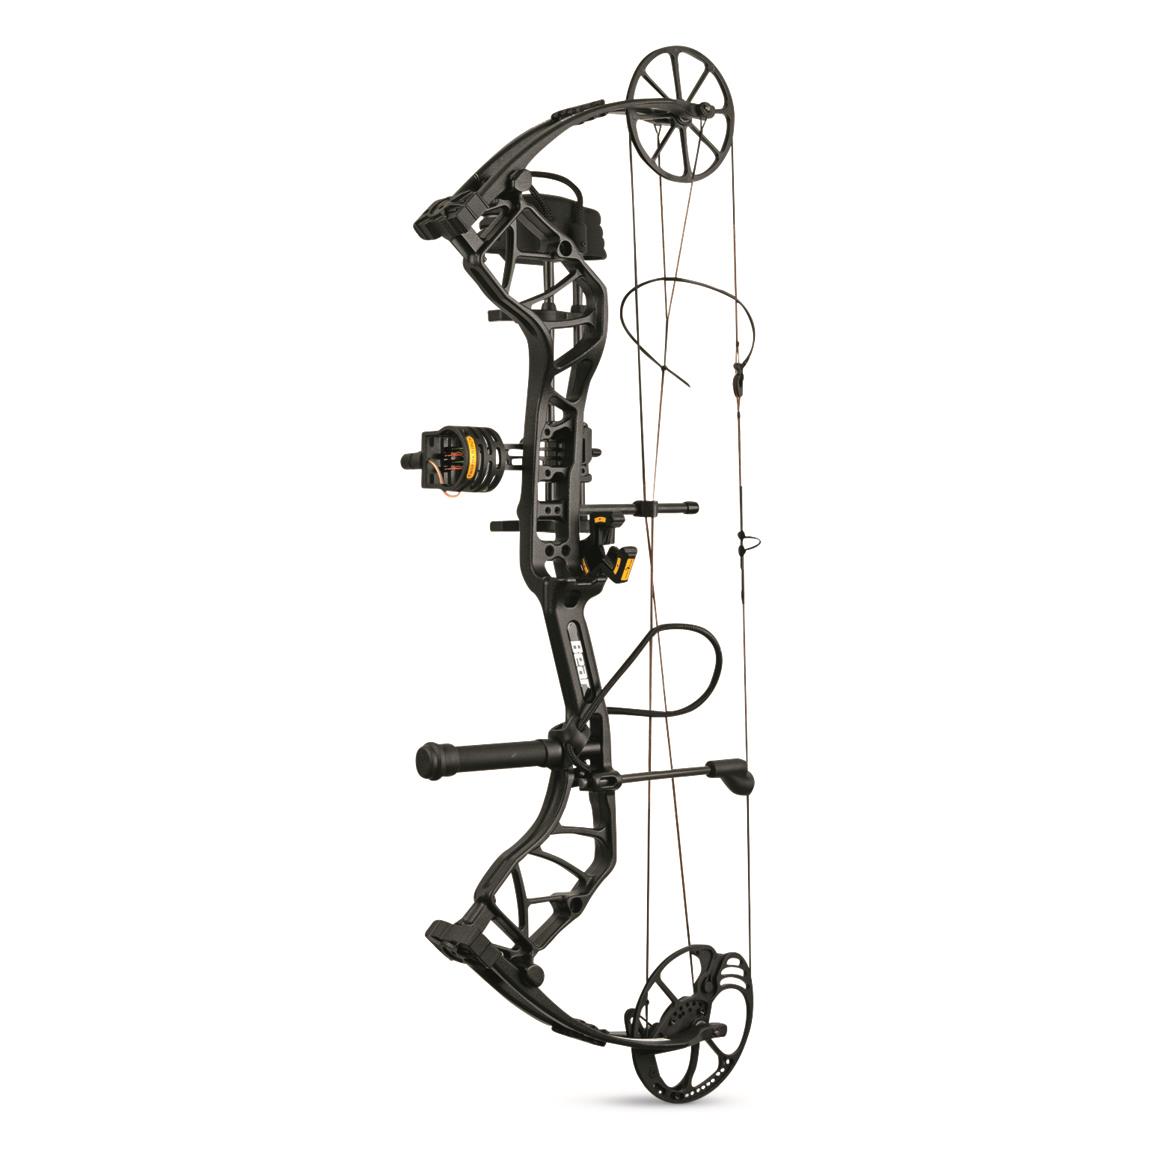 Bear Archery Species EV Ready-to-Hunt Compound Bow Package, Shadow